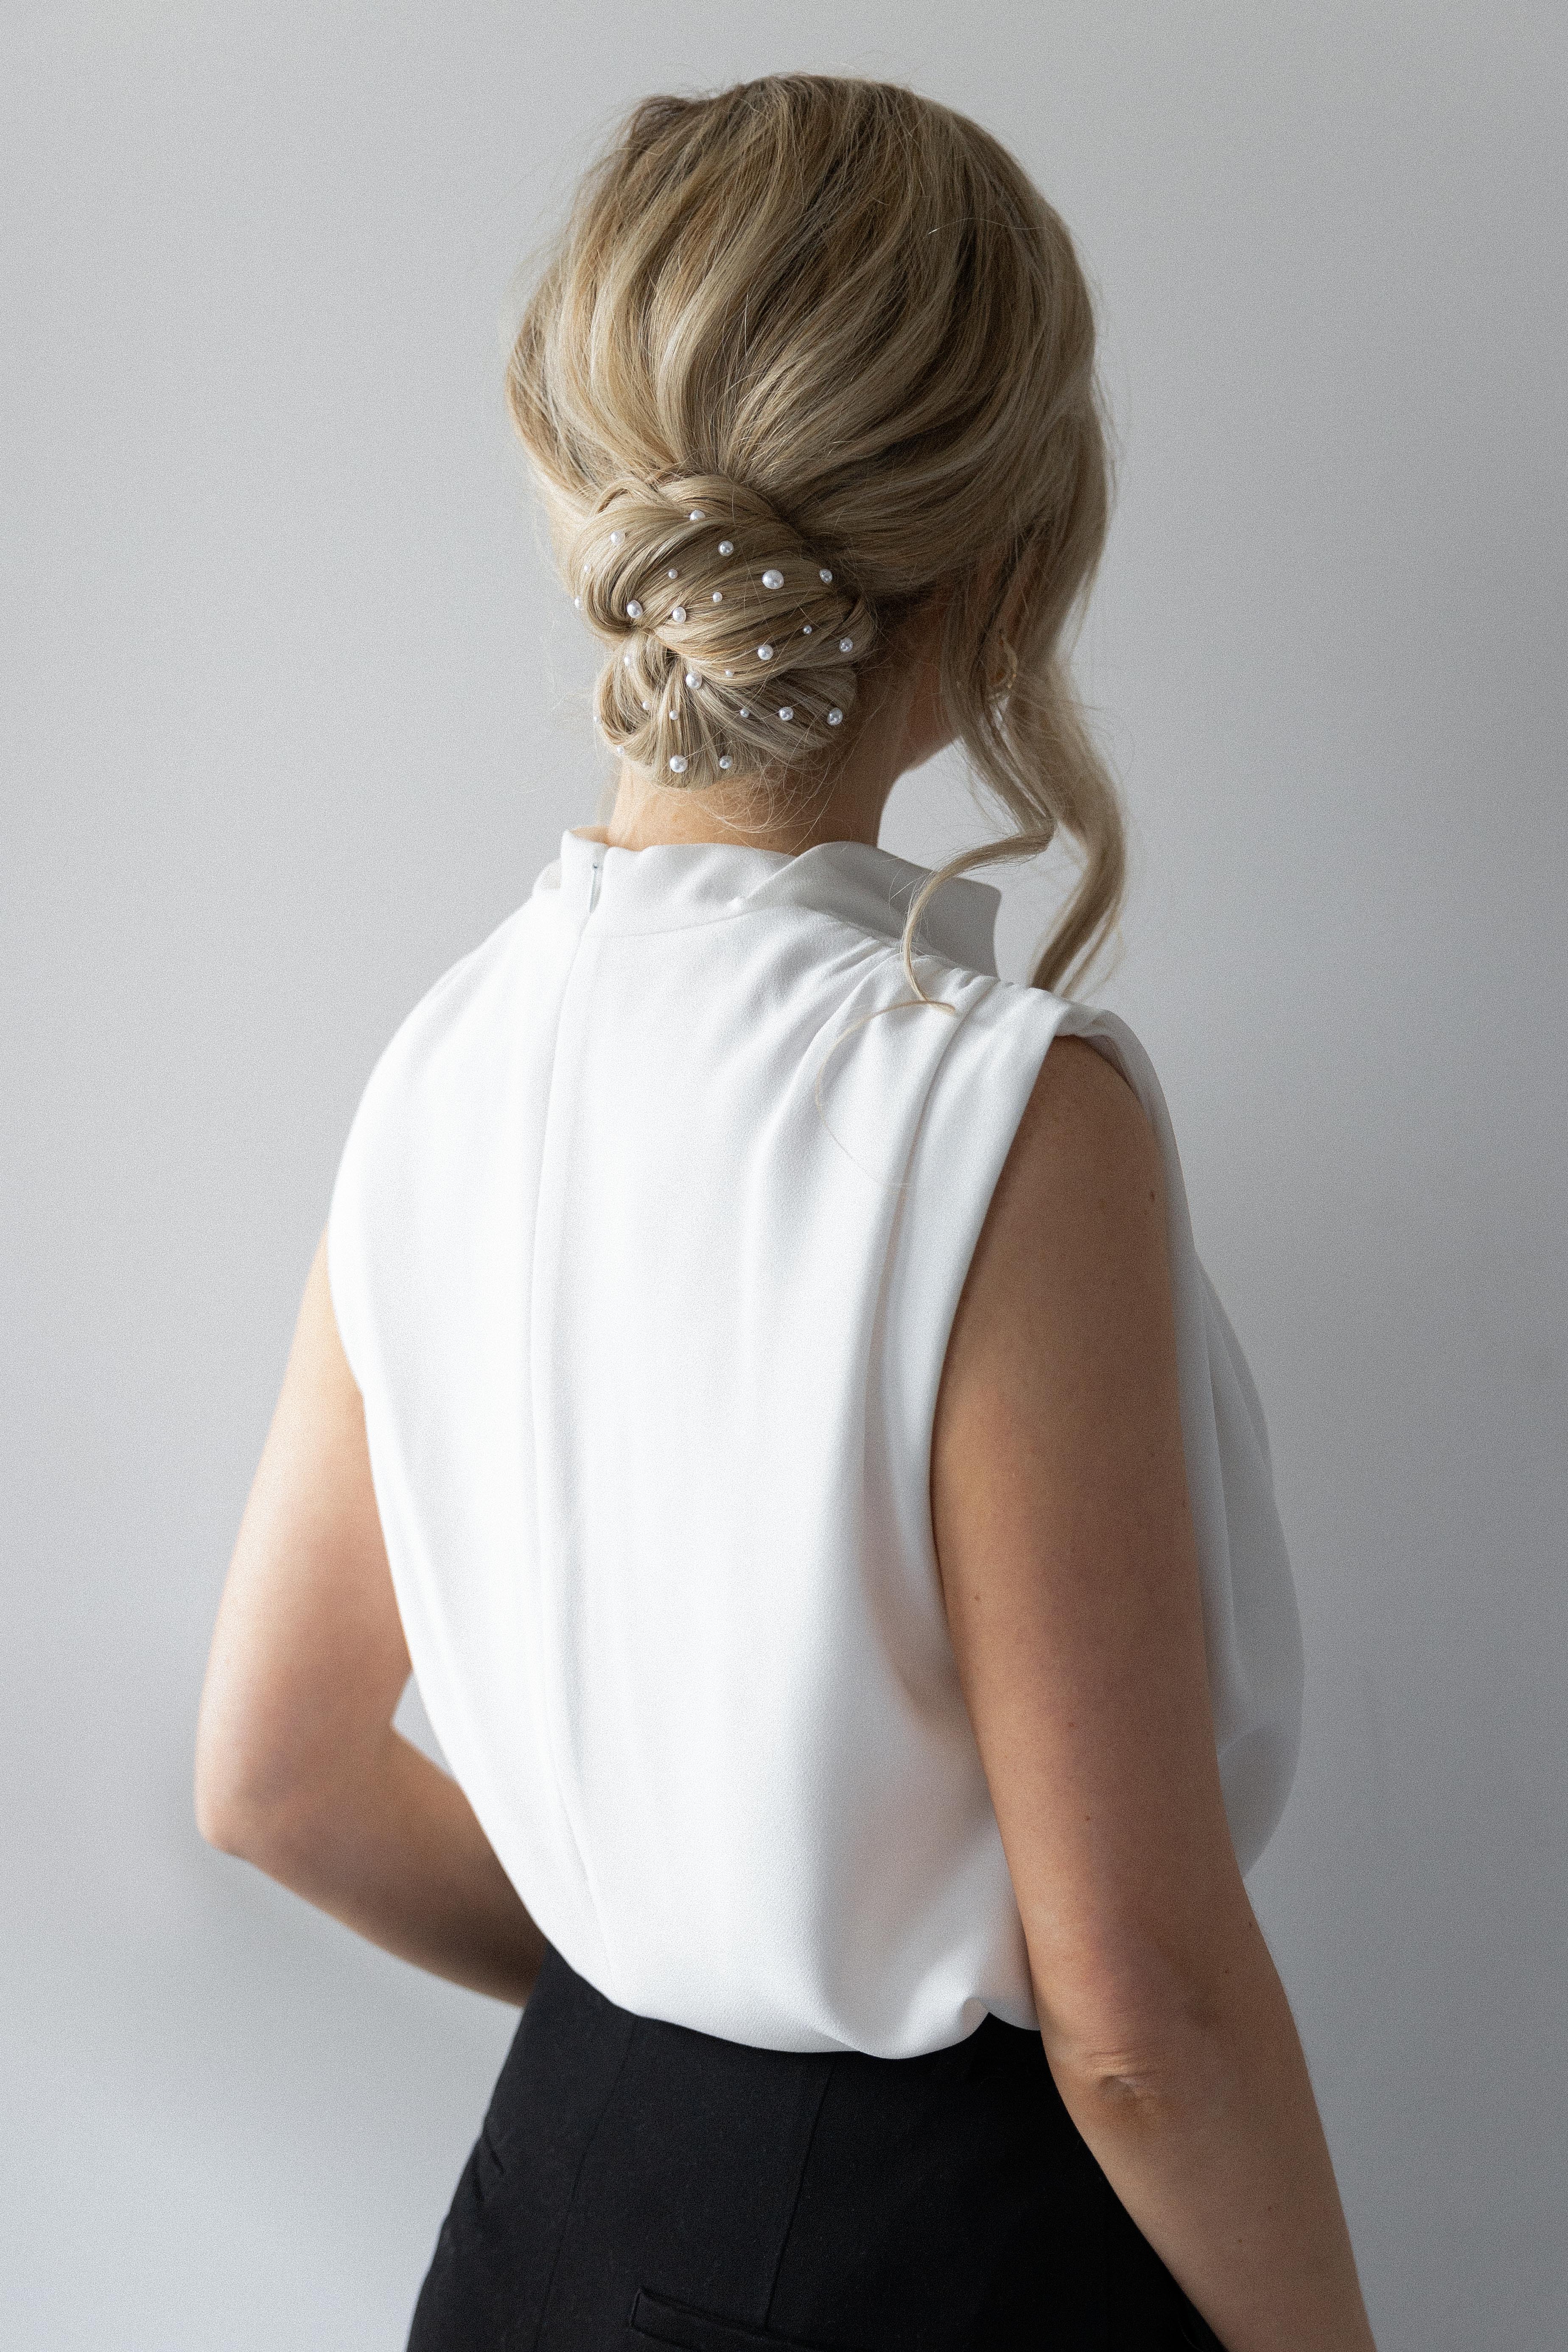 Quick and Easy Updo Hairstyle with Pearls | www.alexgaboury.com